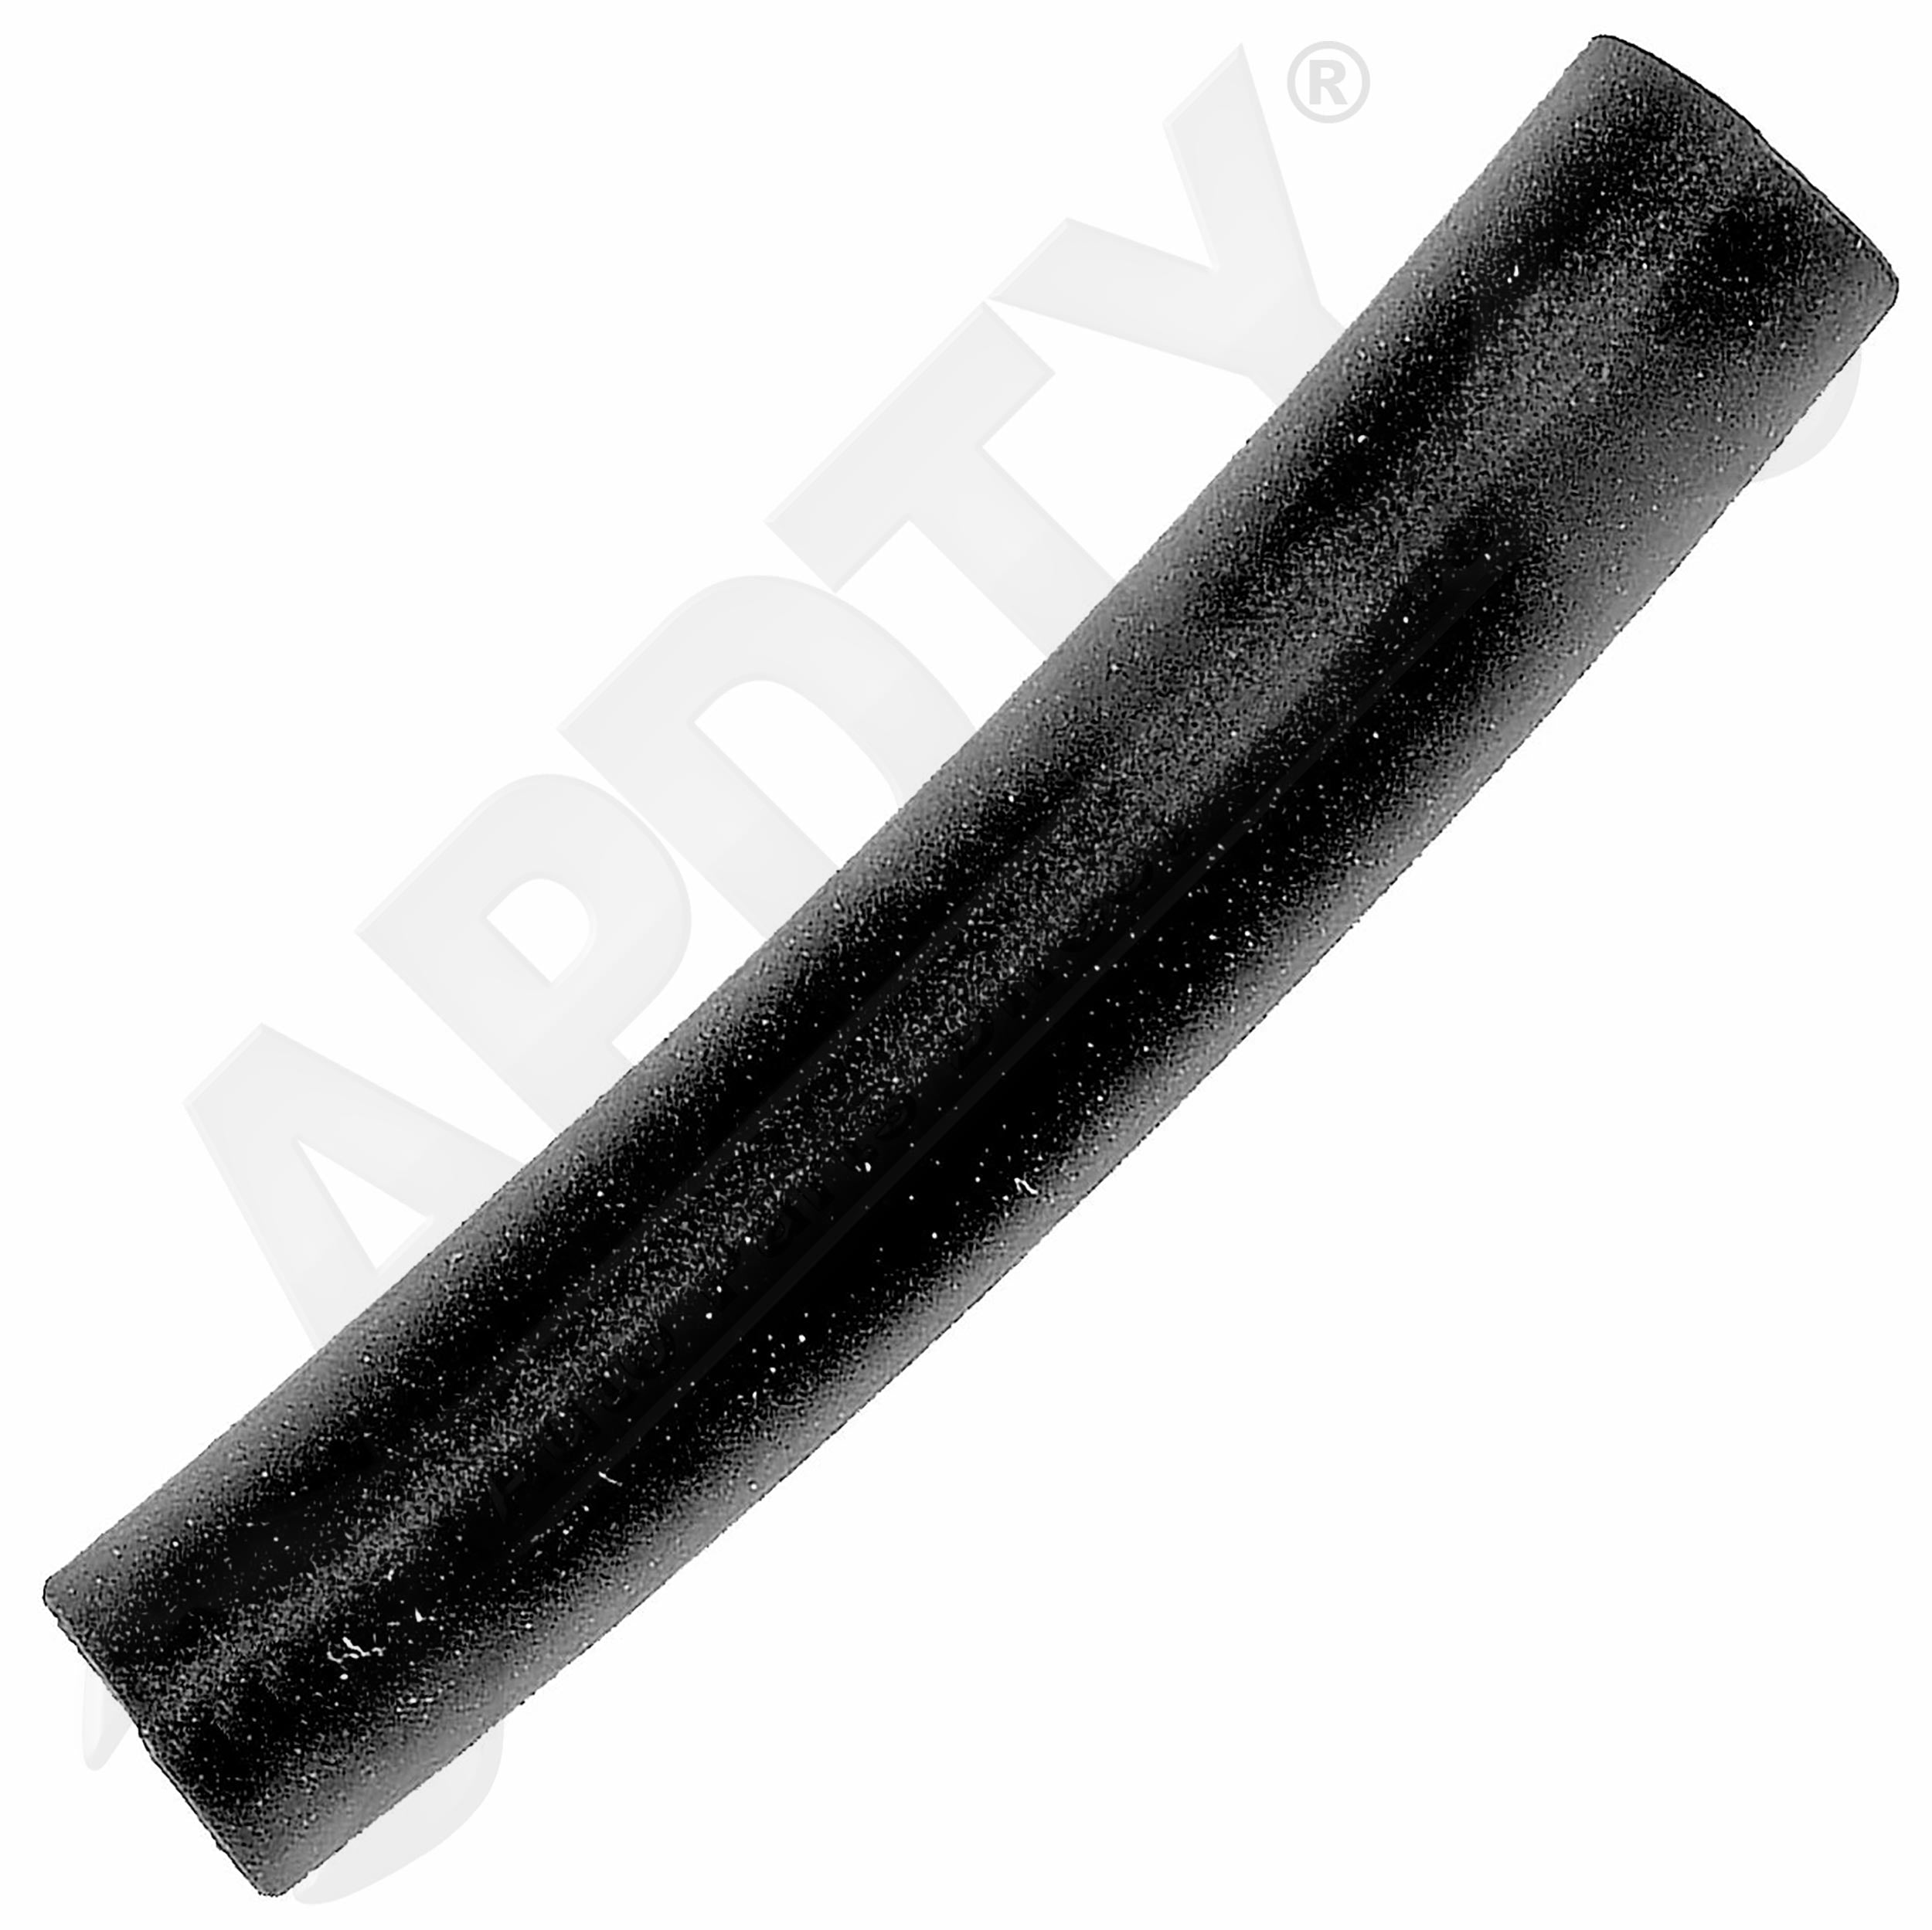 APDTY, APDTY 142685 Uninsulated 16-22GA Butt Connectors